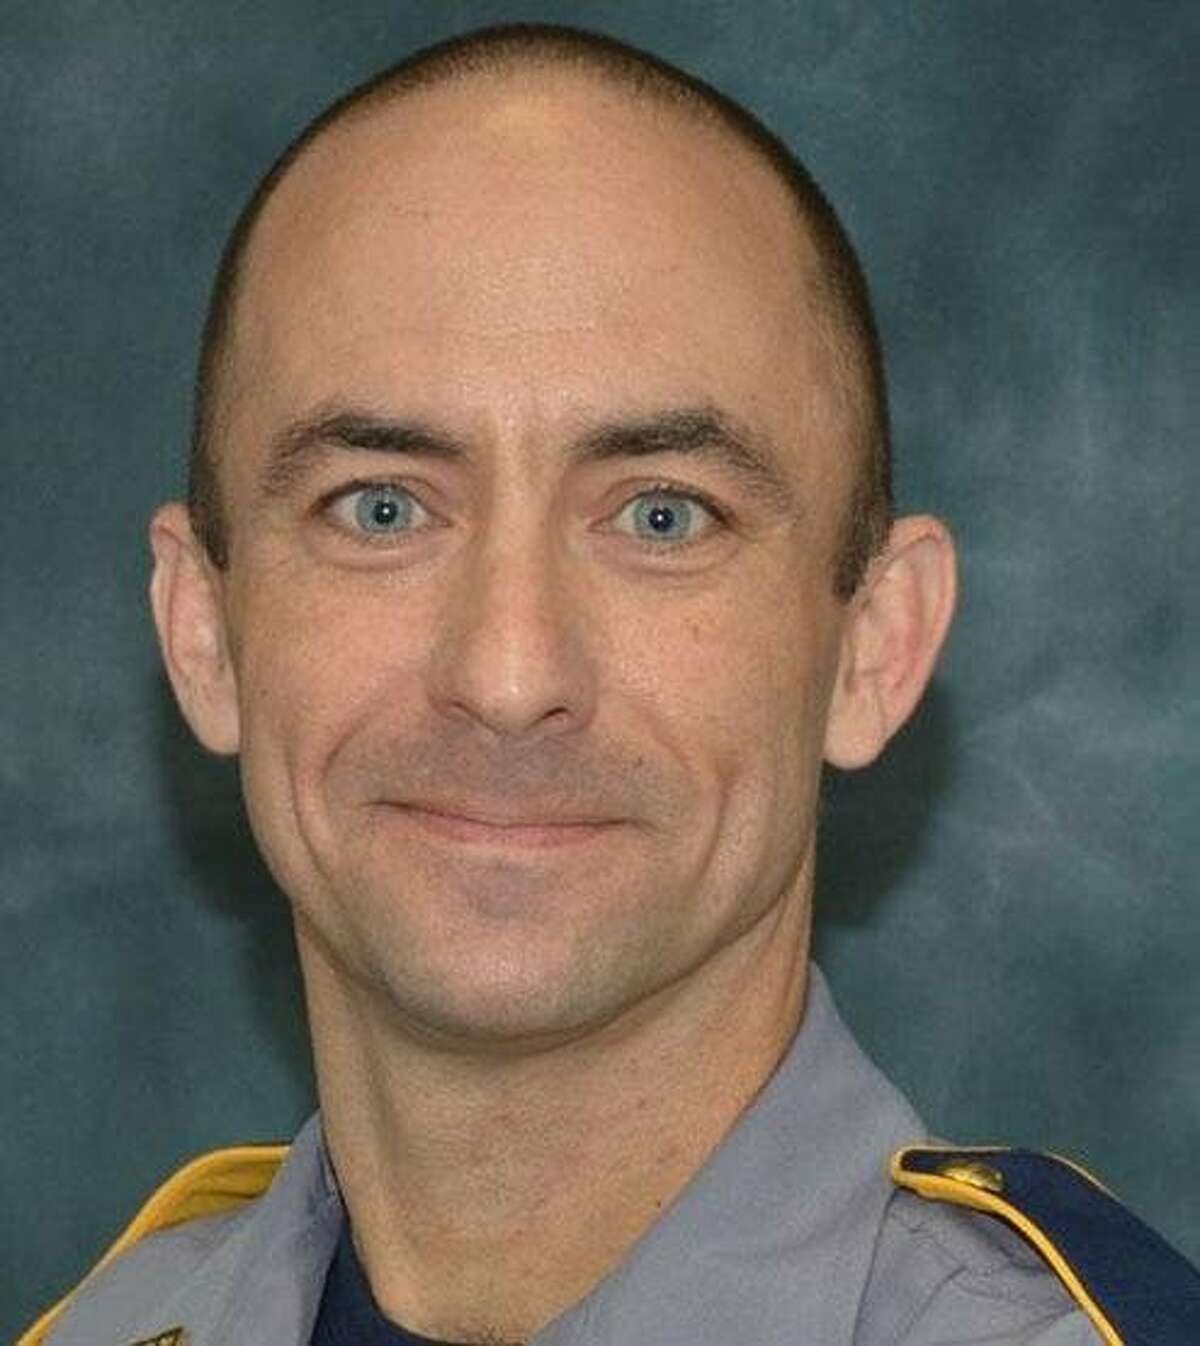 Matthew Gerald, 41, was among the three officers killed in Baton Rouge, La. MUST CREDIT: Handout photo by Baton Rouge Police Department